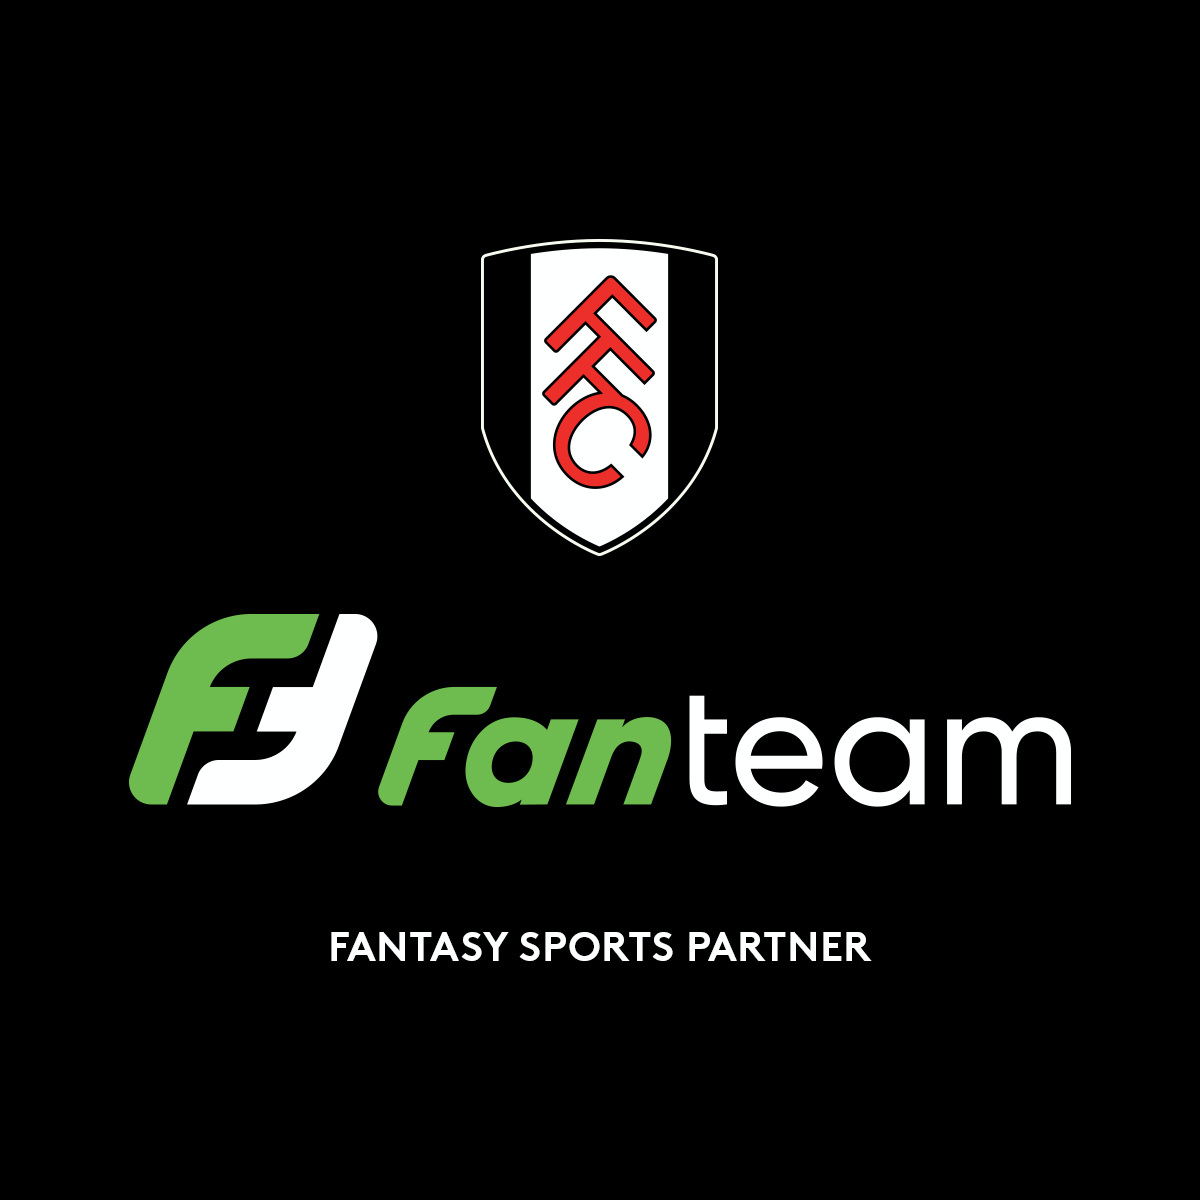 Scout Gaming signs sponsorship with Fulham FC through FanTeam